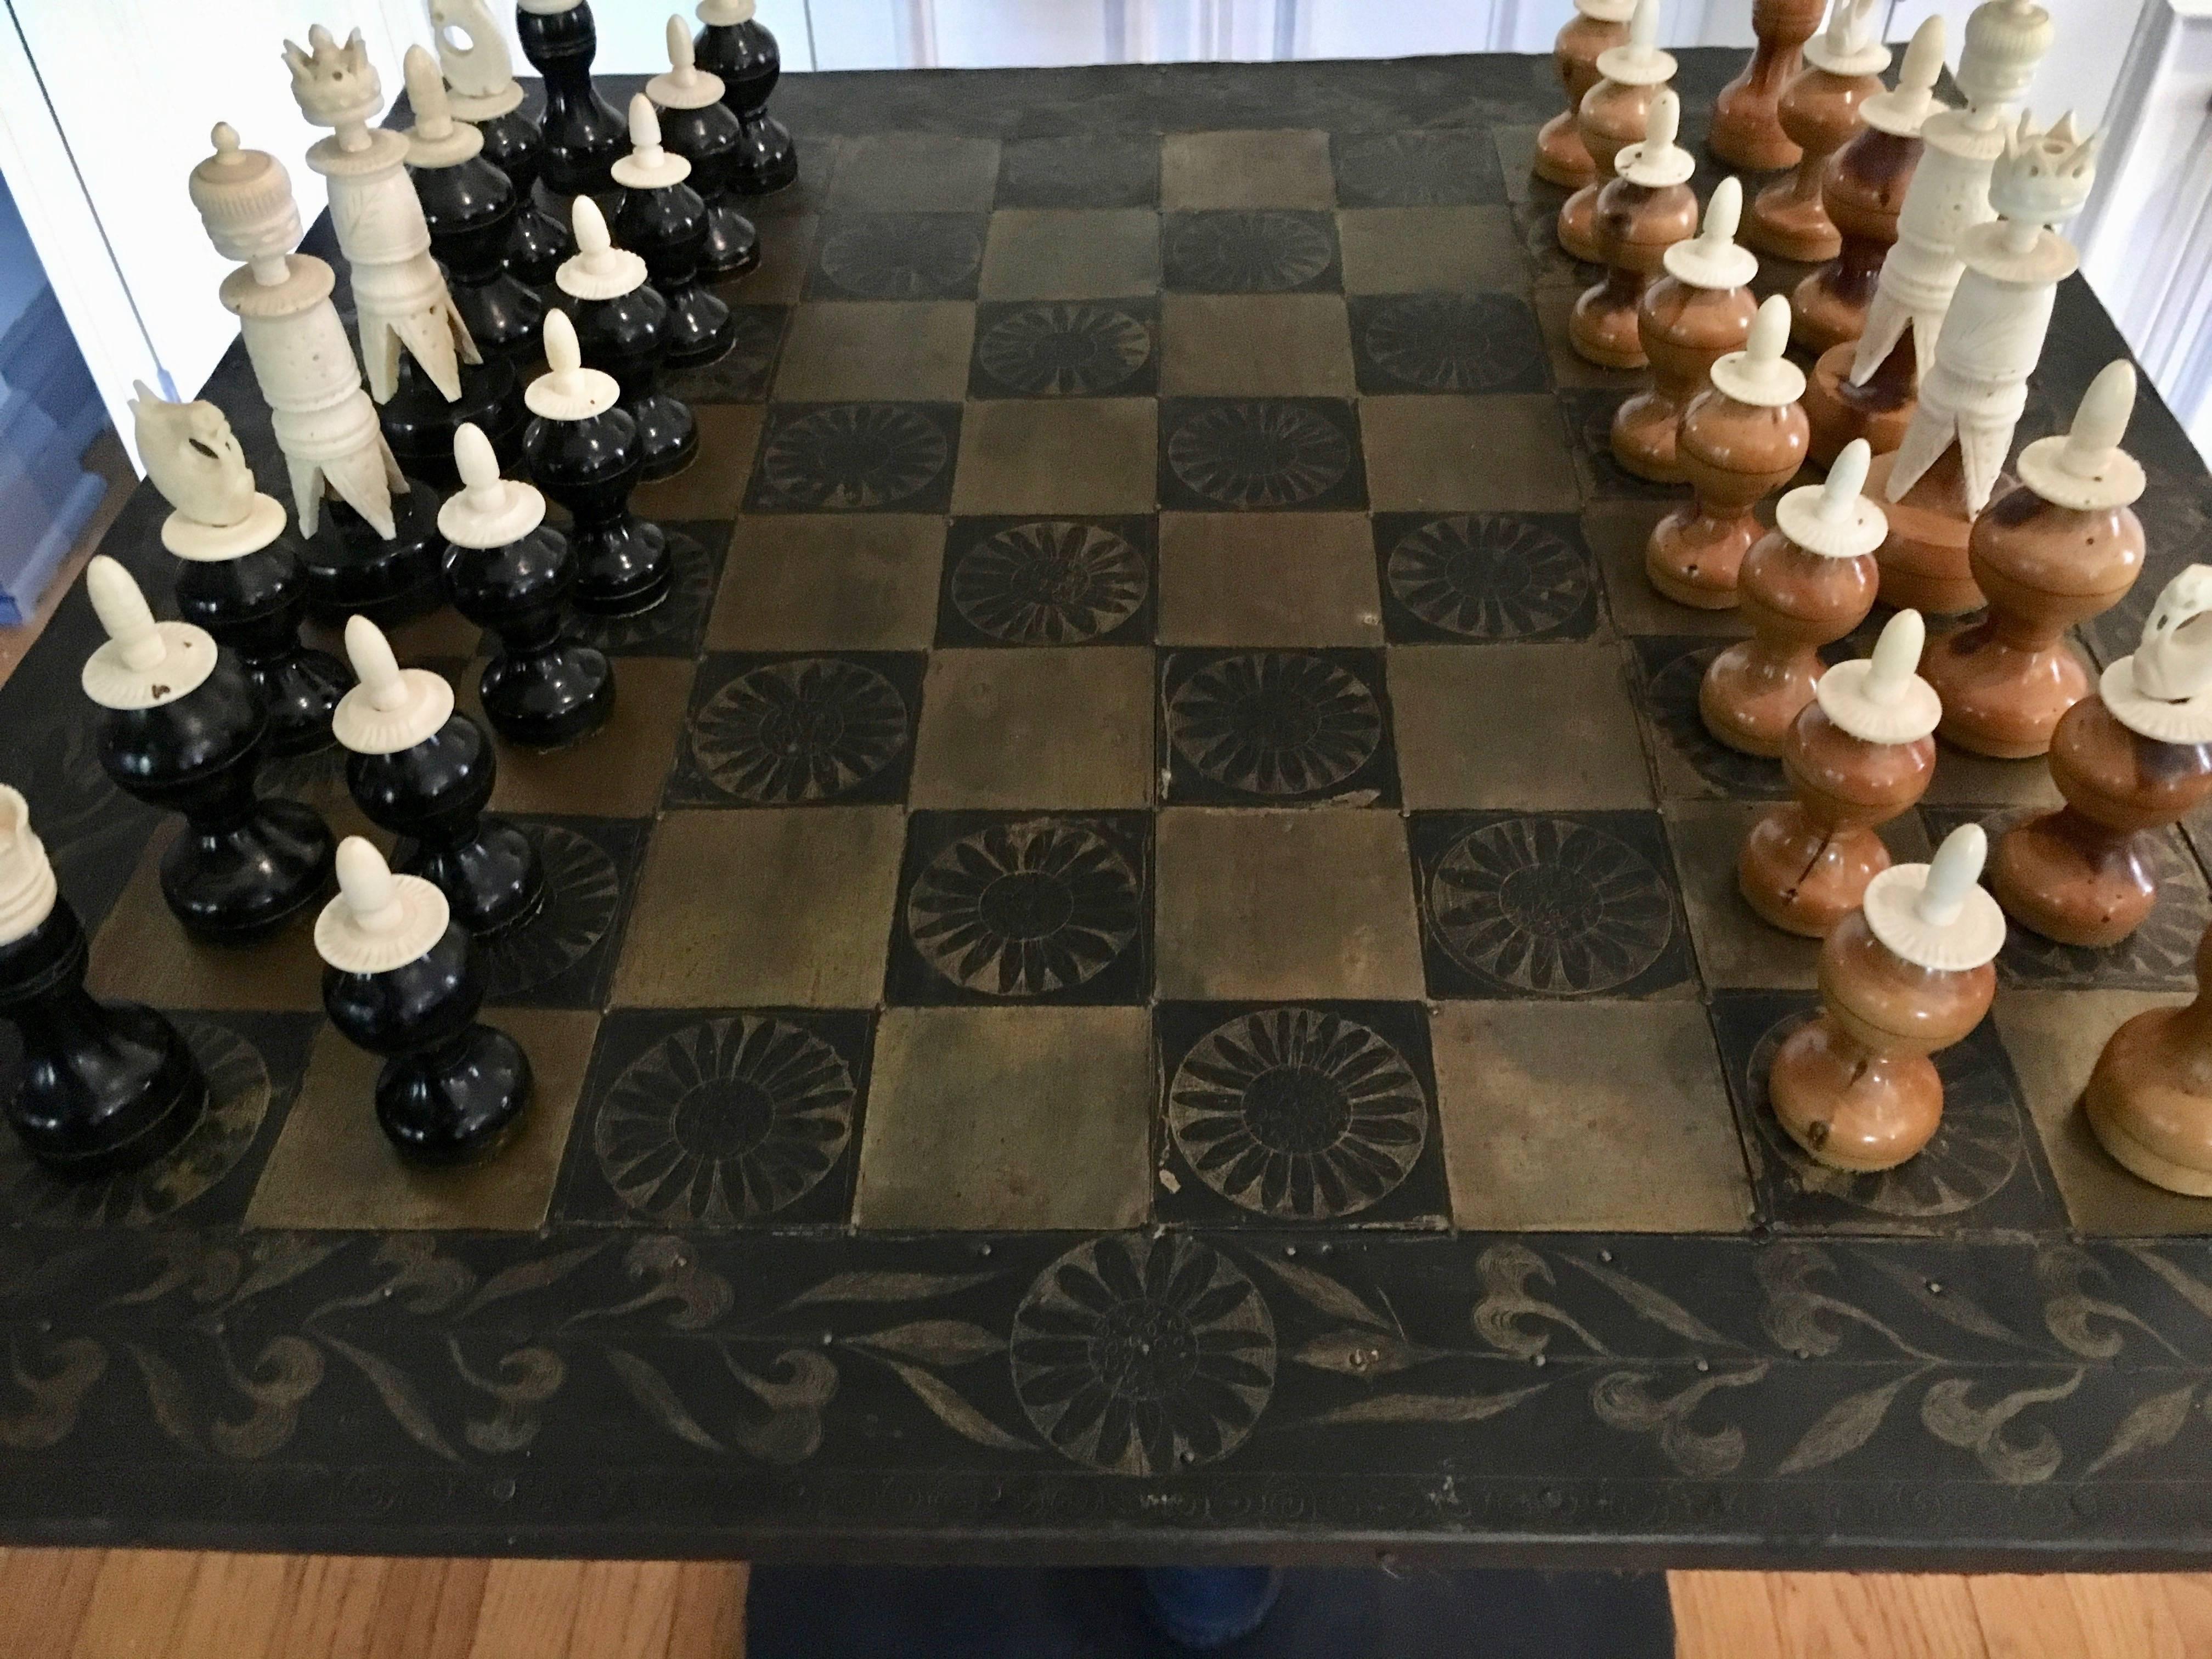 Metal Mexican chess board with hand-carved wooden chess men - the table is felt backed and can be removed to play on any surface, handmade in Mexico of hammered metal with hand-carved wooden men.